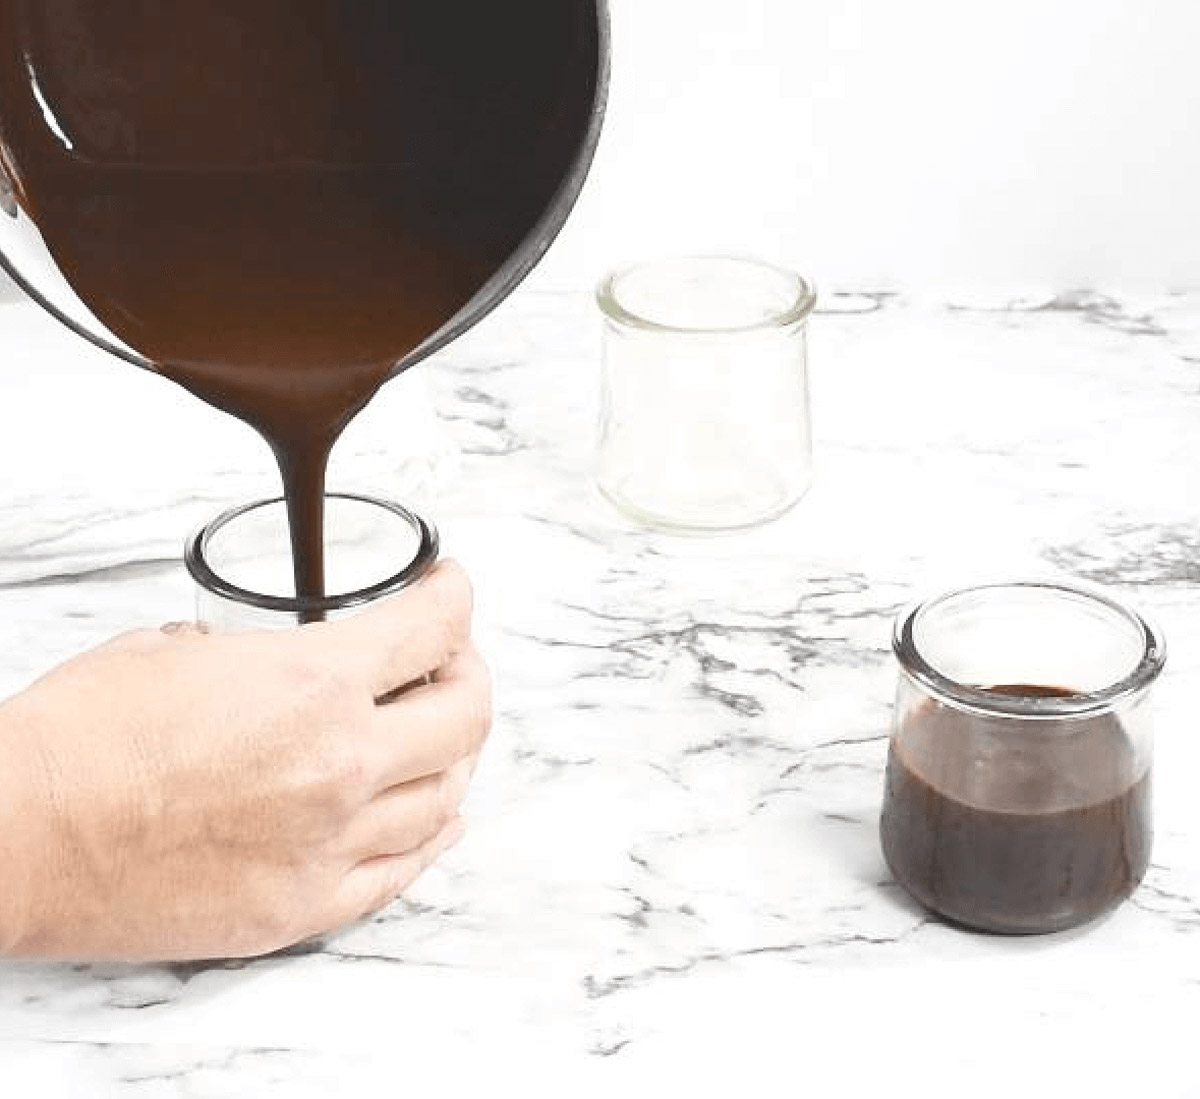 Pouring chocolate into small glass jars.